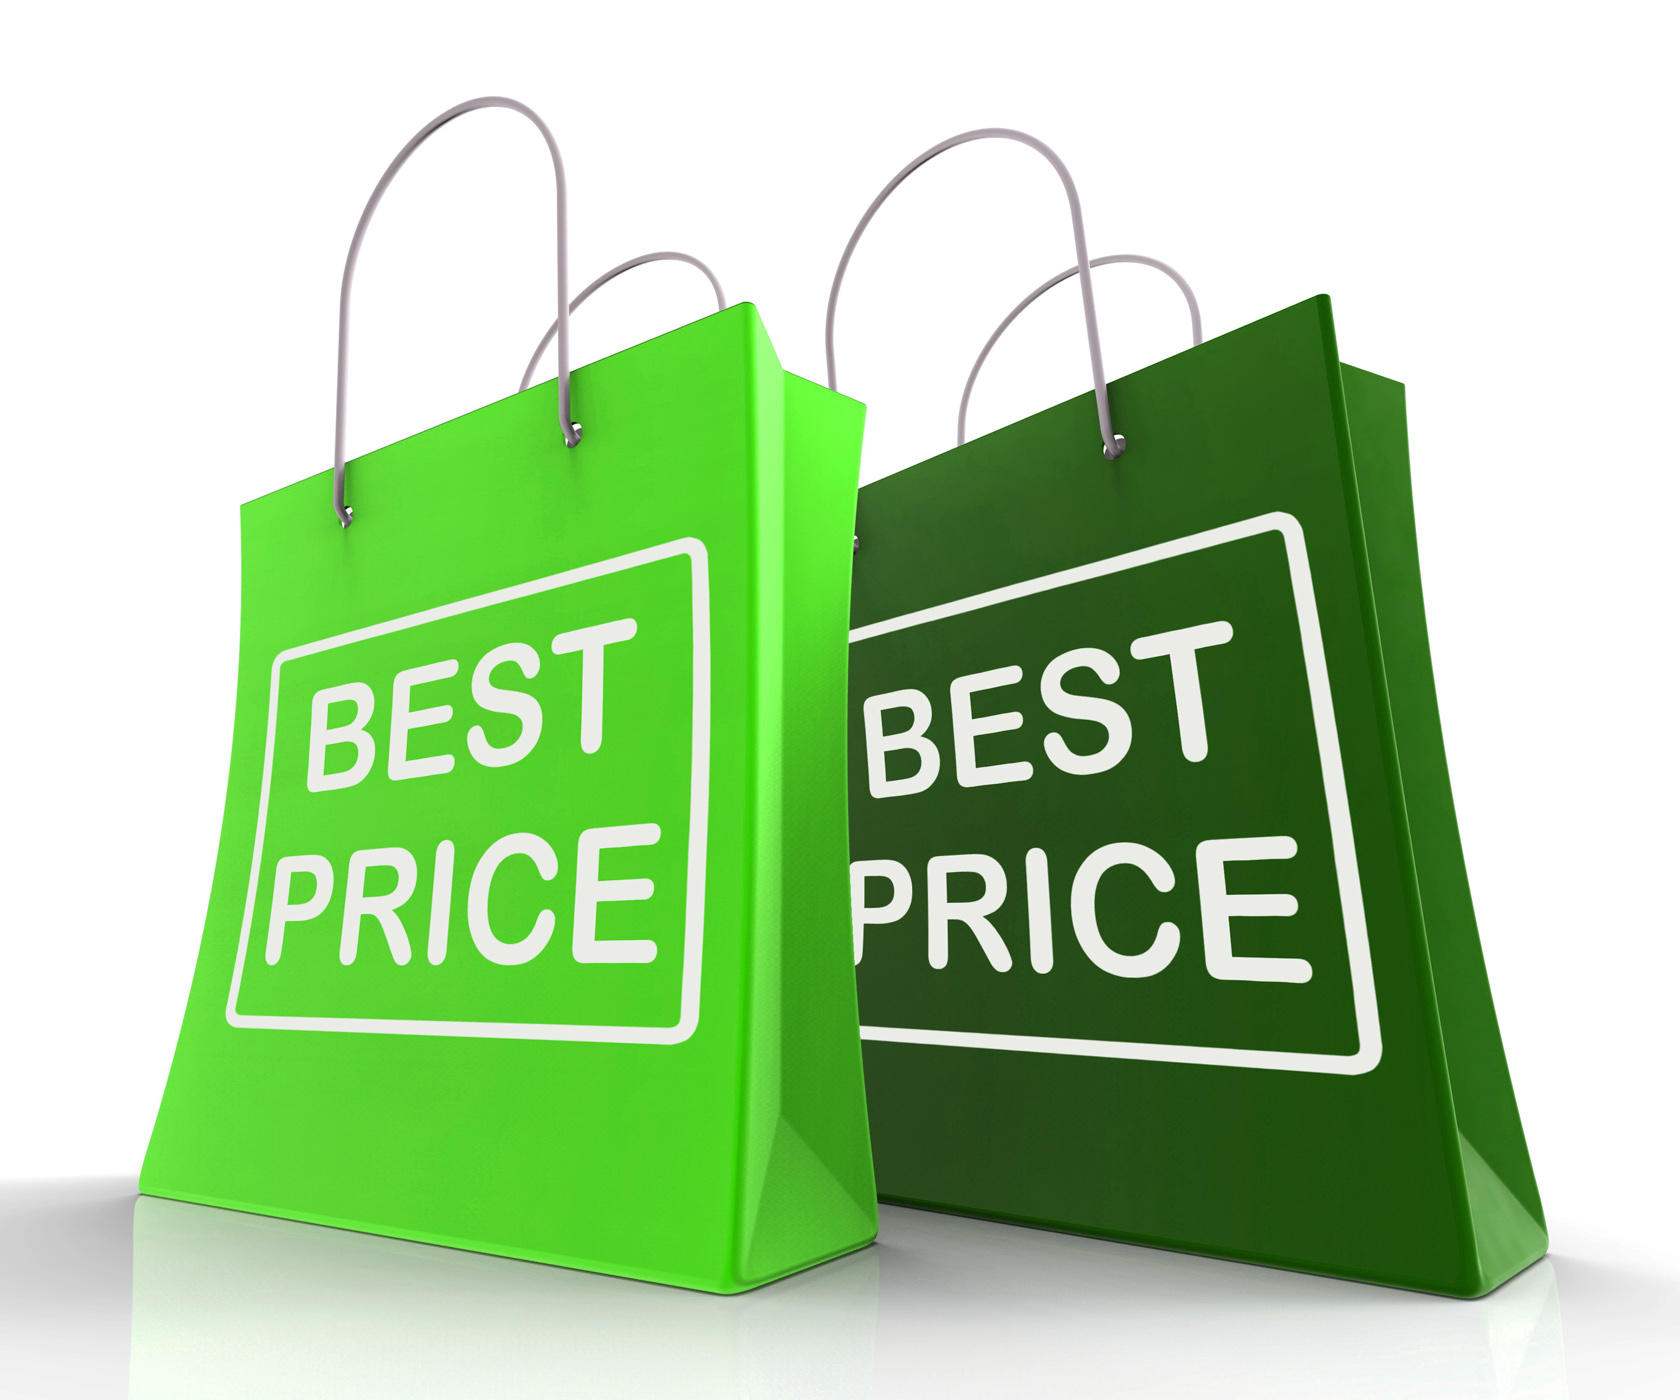 Best price bags represent discounts and bargains photo